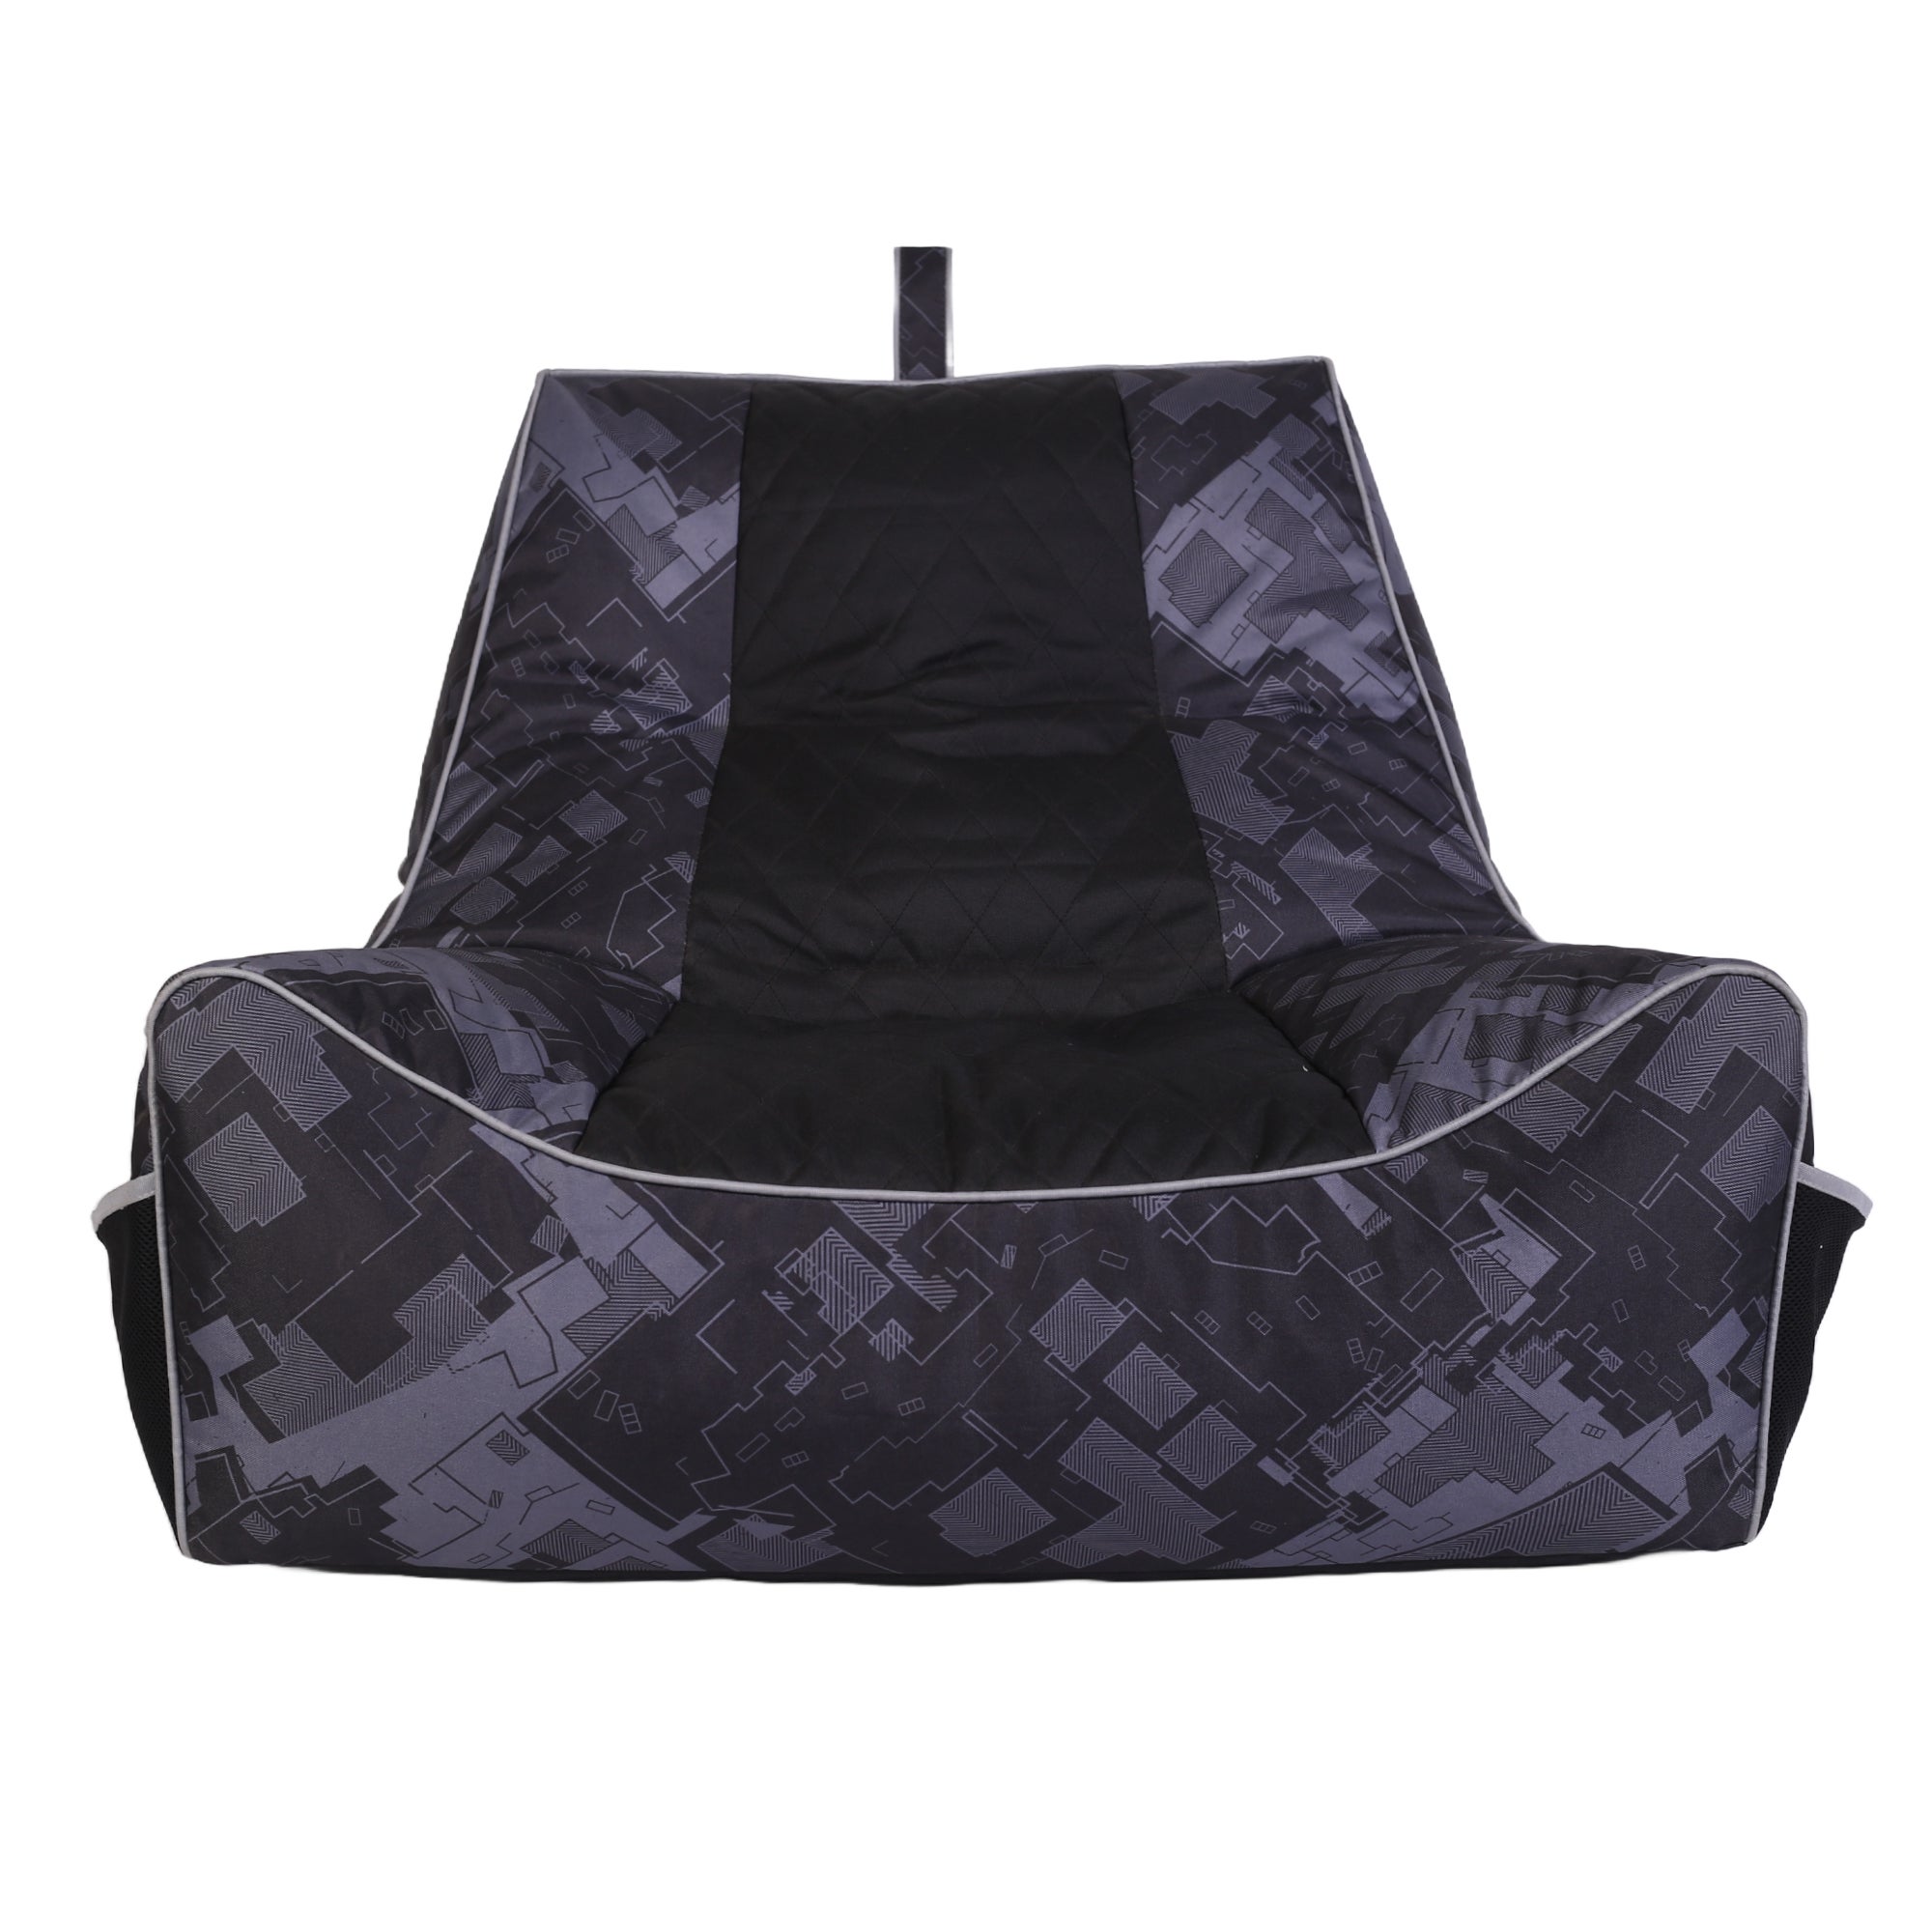 Kaikoo Quilted Relaxer Gaming Beanbag Chair